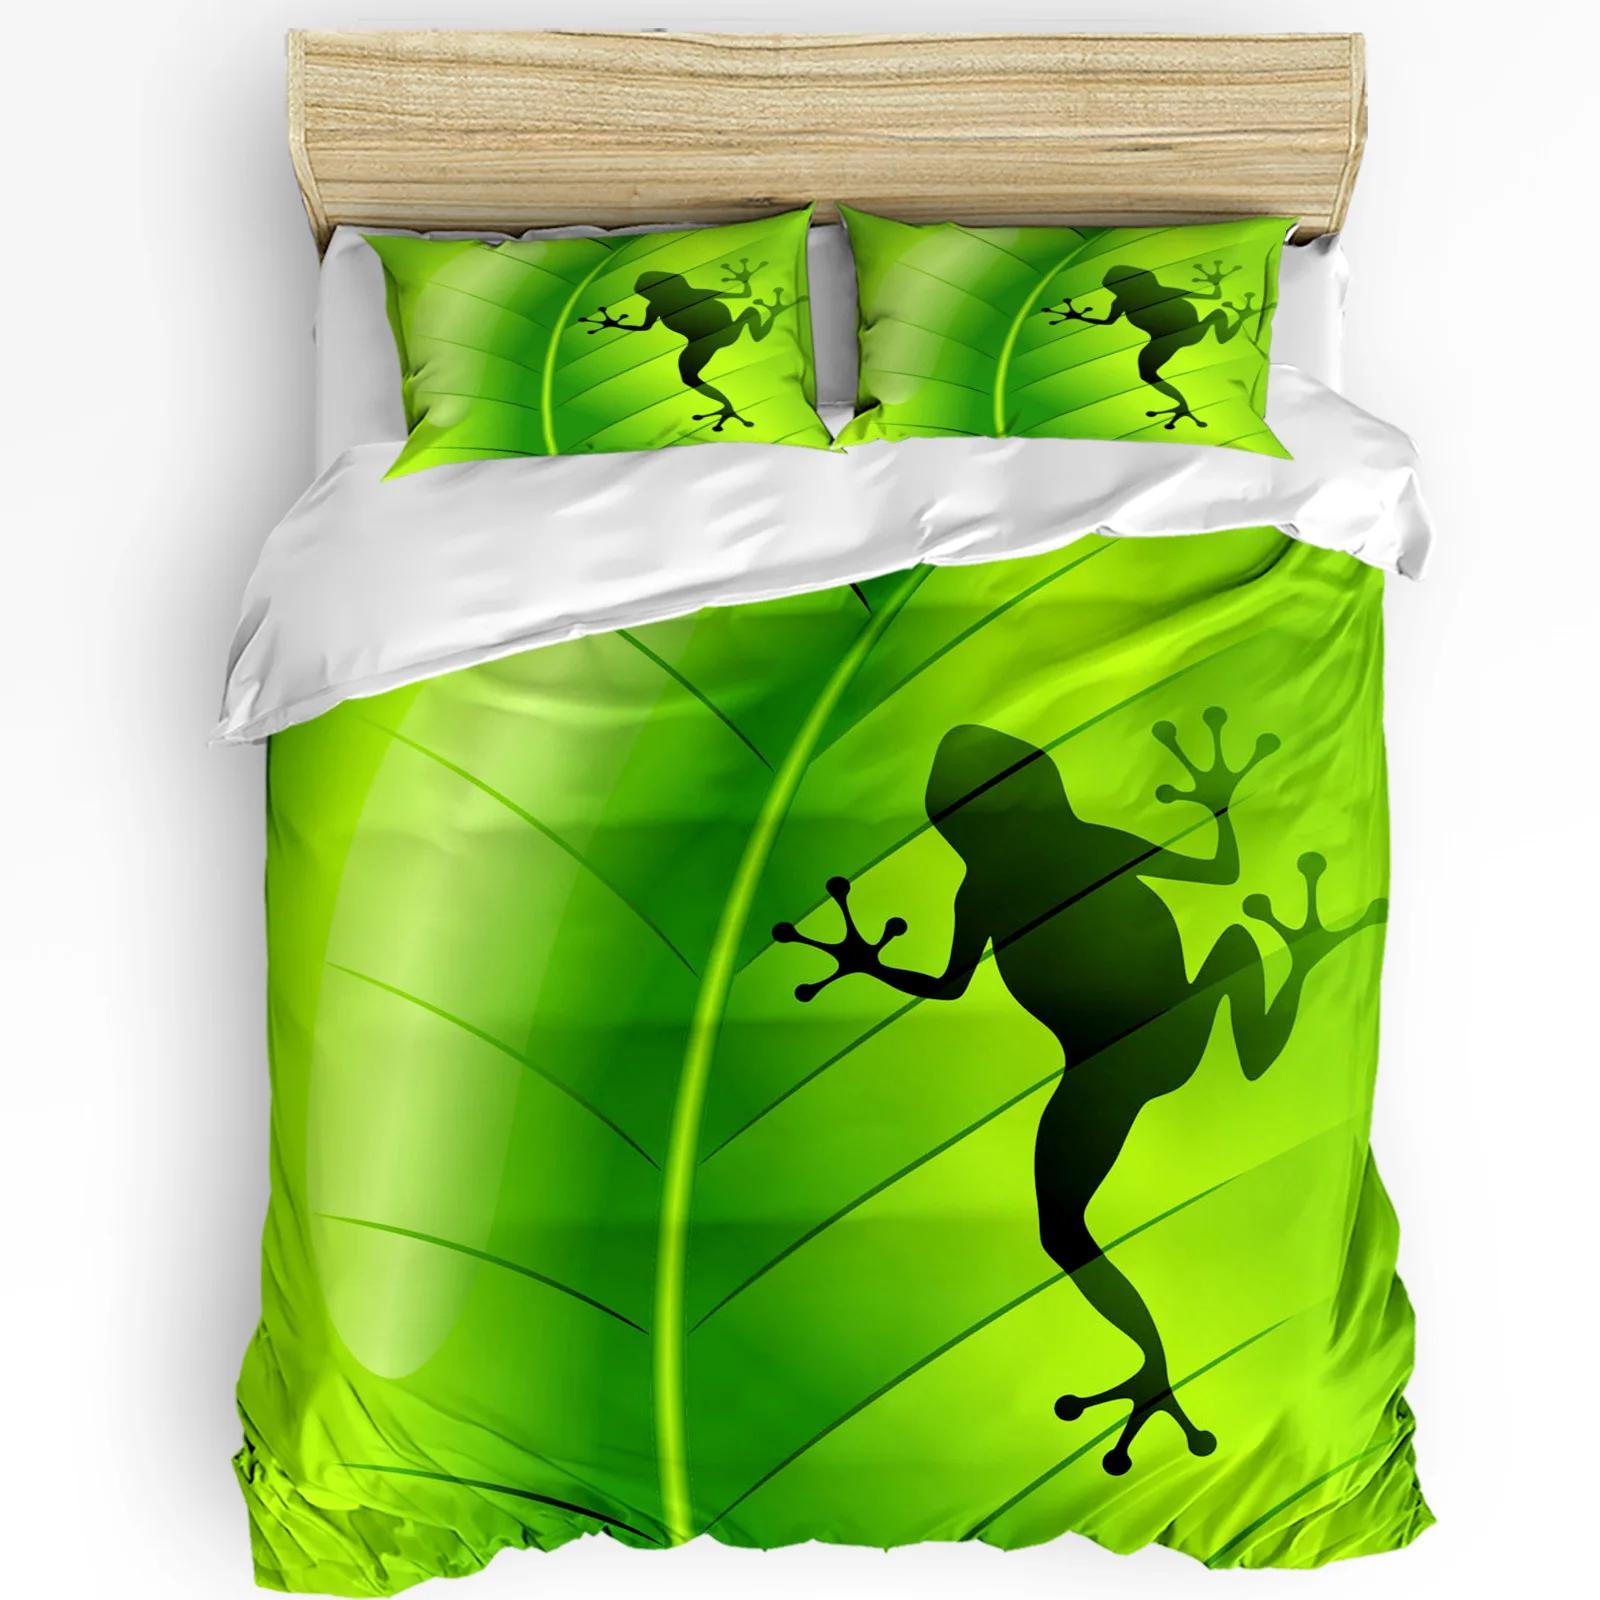 Animal Frog Silhouette Green Leaf Plant Bedding Set 3pcs Duvet Cover Pillowcase Quilt Cover Double Bed Set Home Text